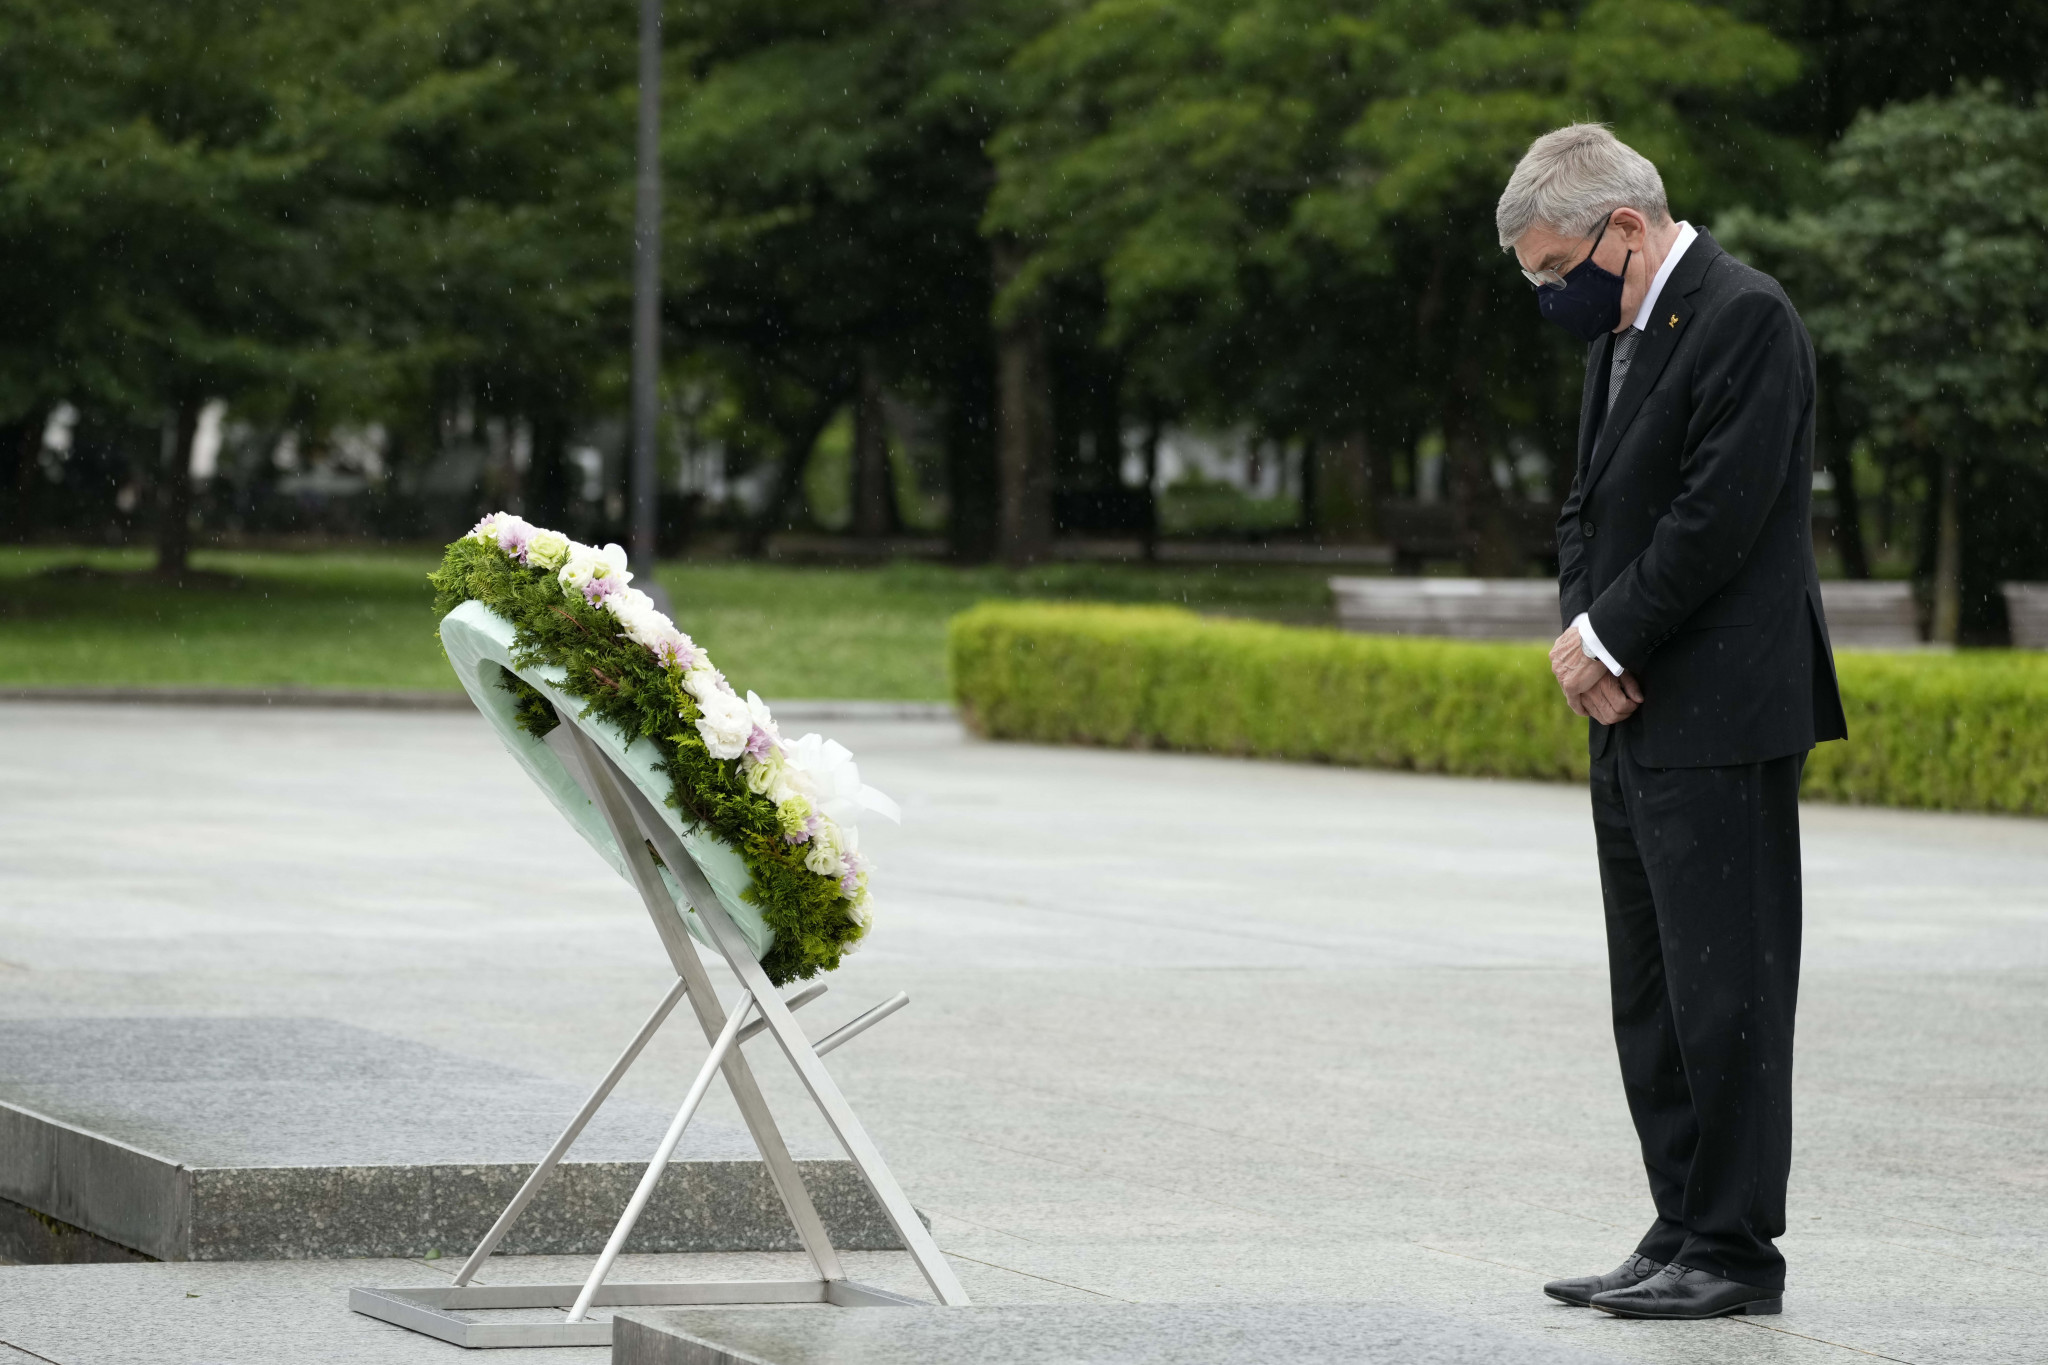 Tokyo 2020 will follow IOC directions and not commemorate Hiroshima atomic bomb victims on anniversary